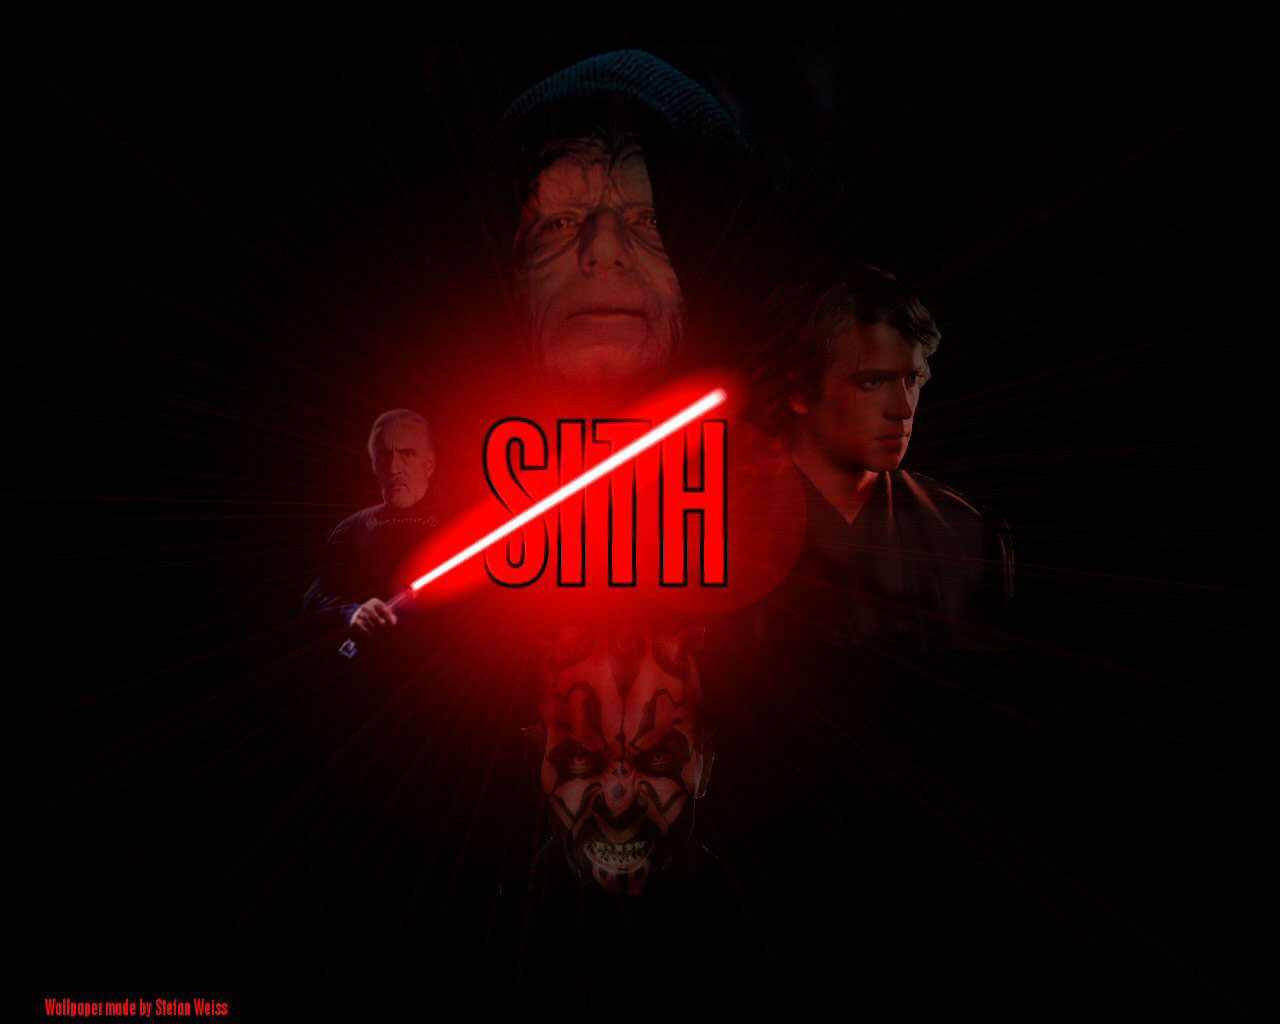 Sith Lords